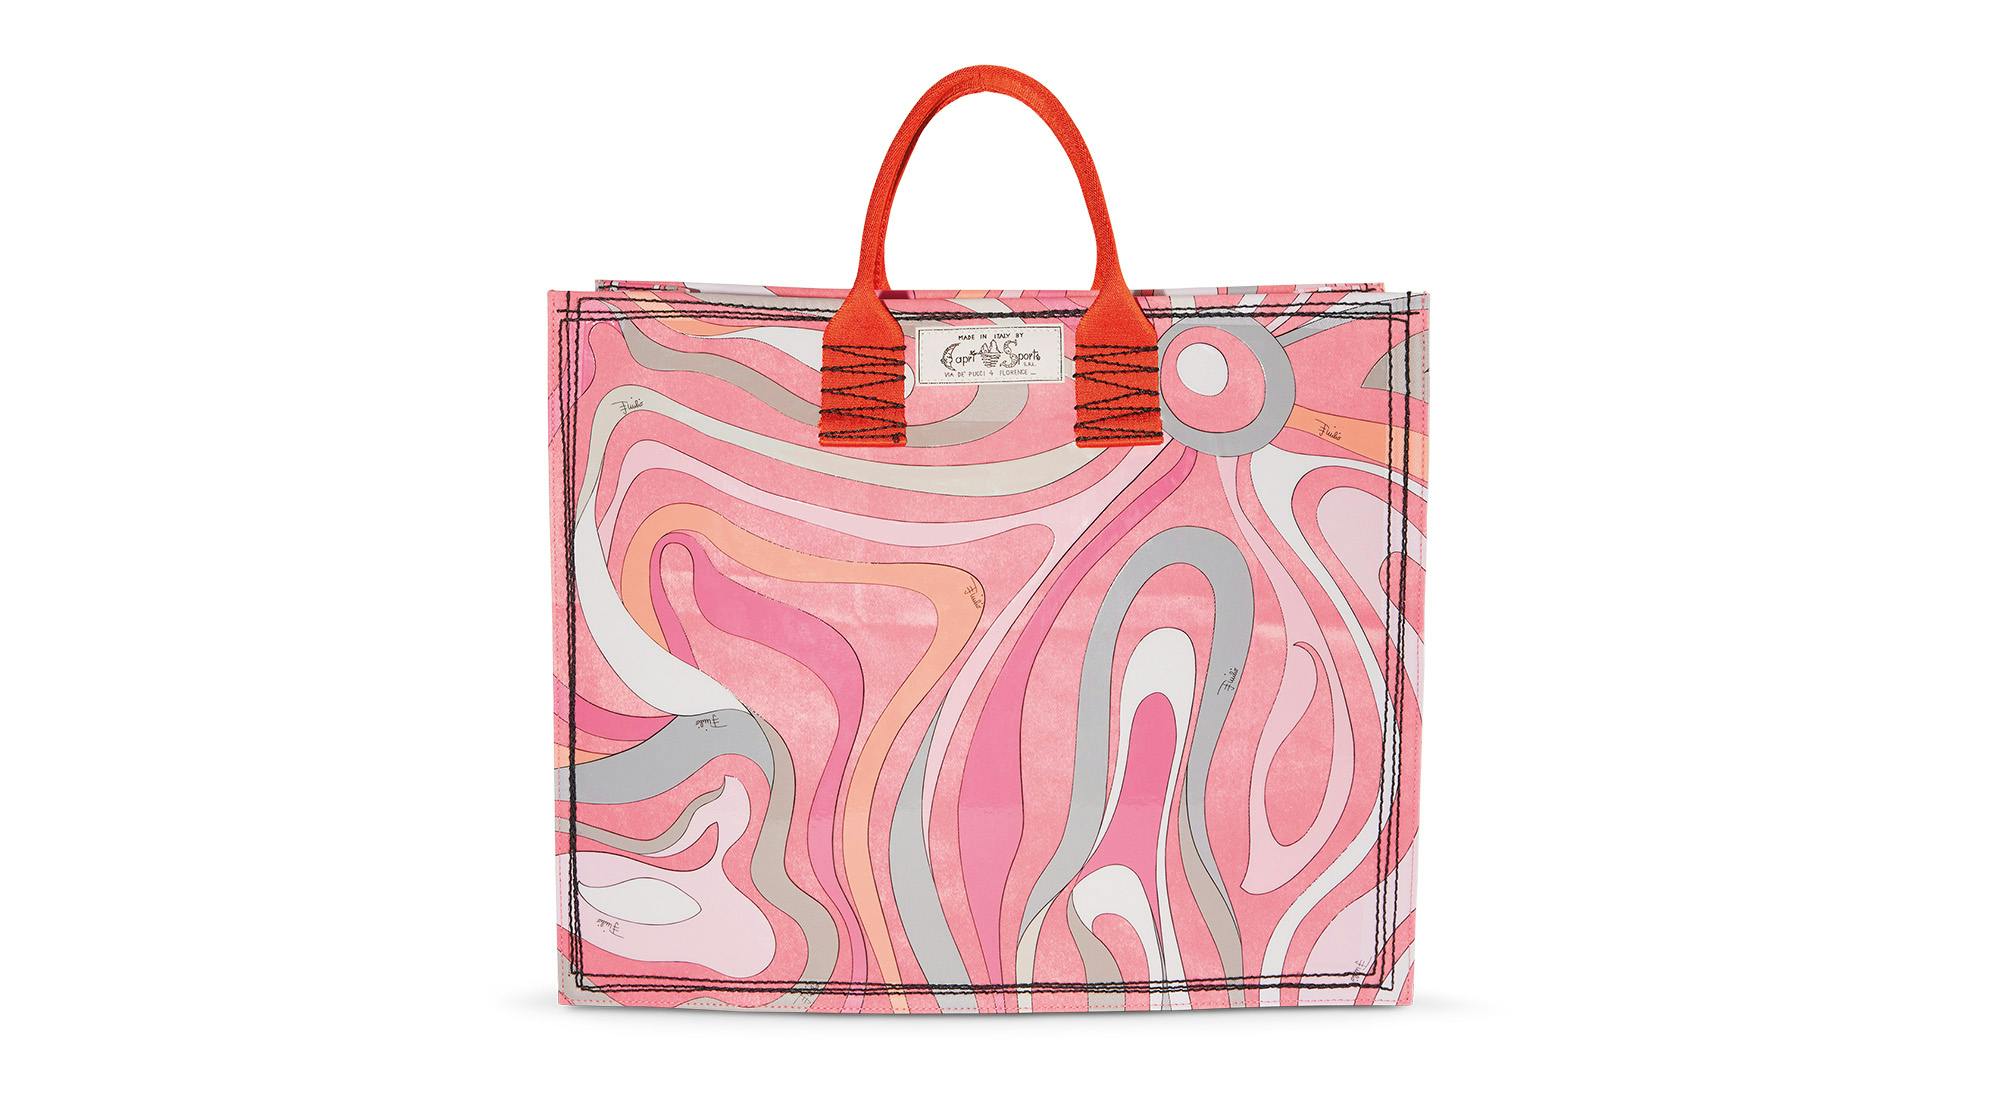 Marmo print bag by Pucci